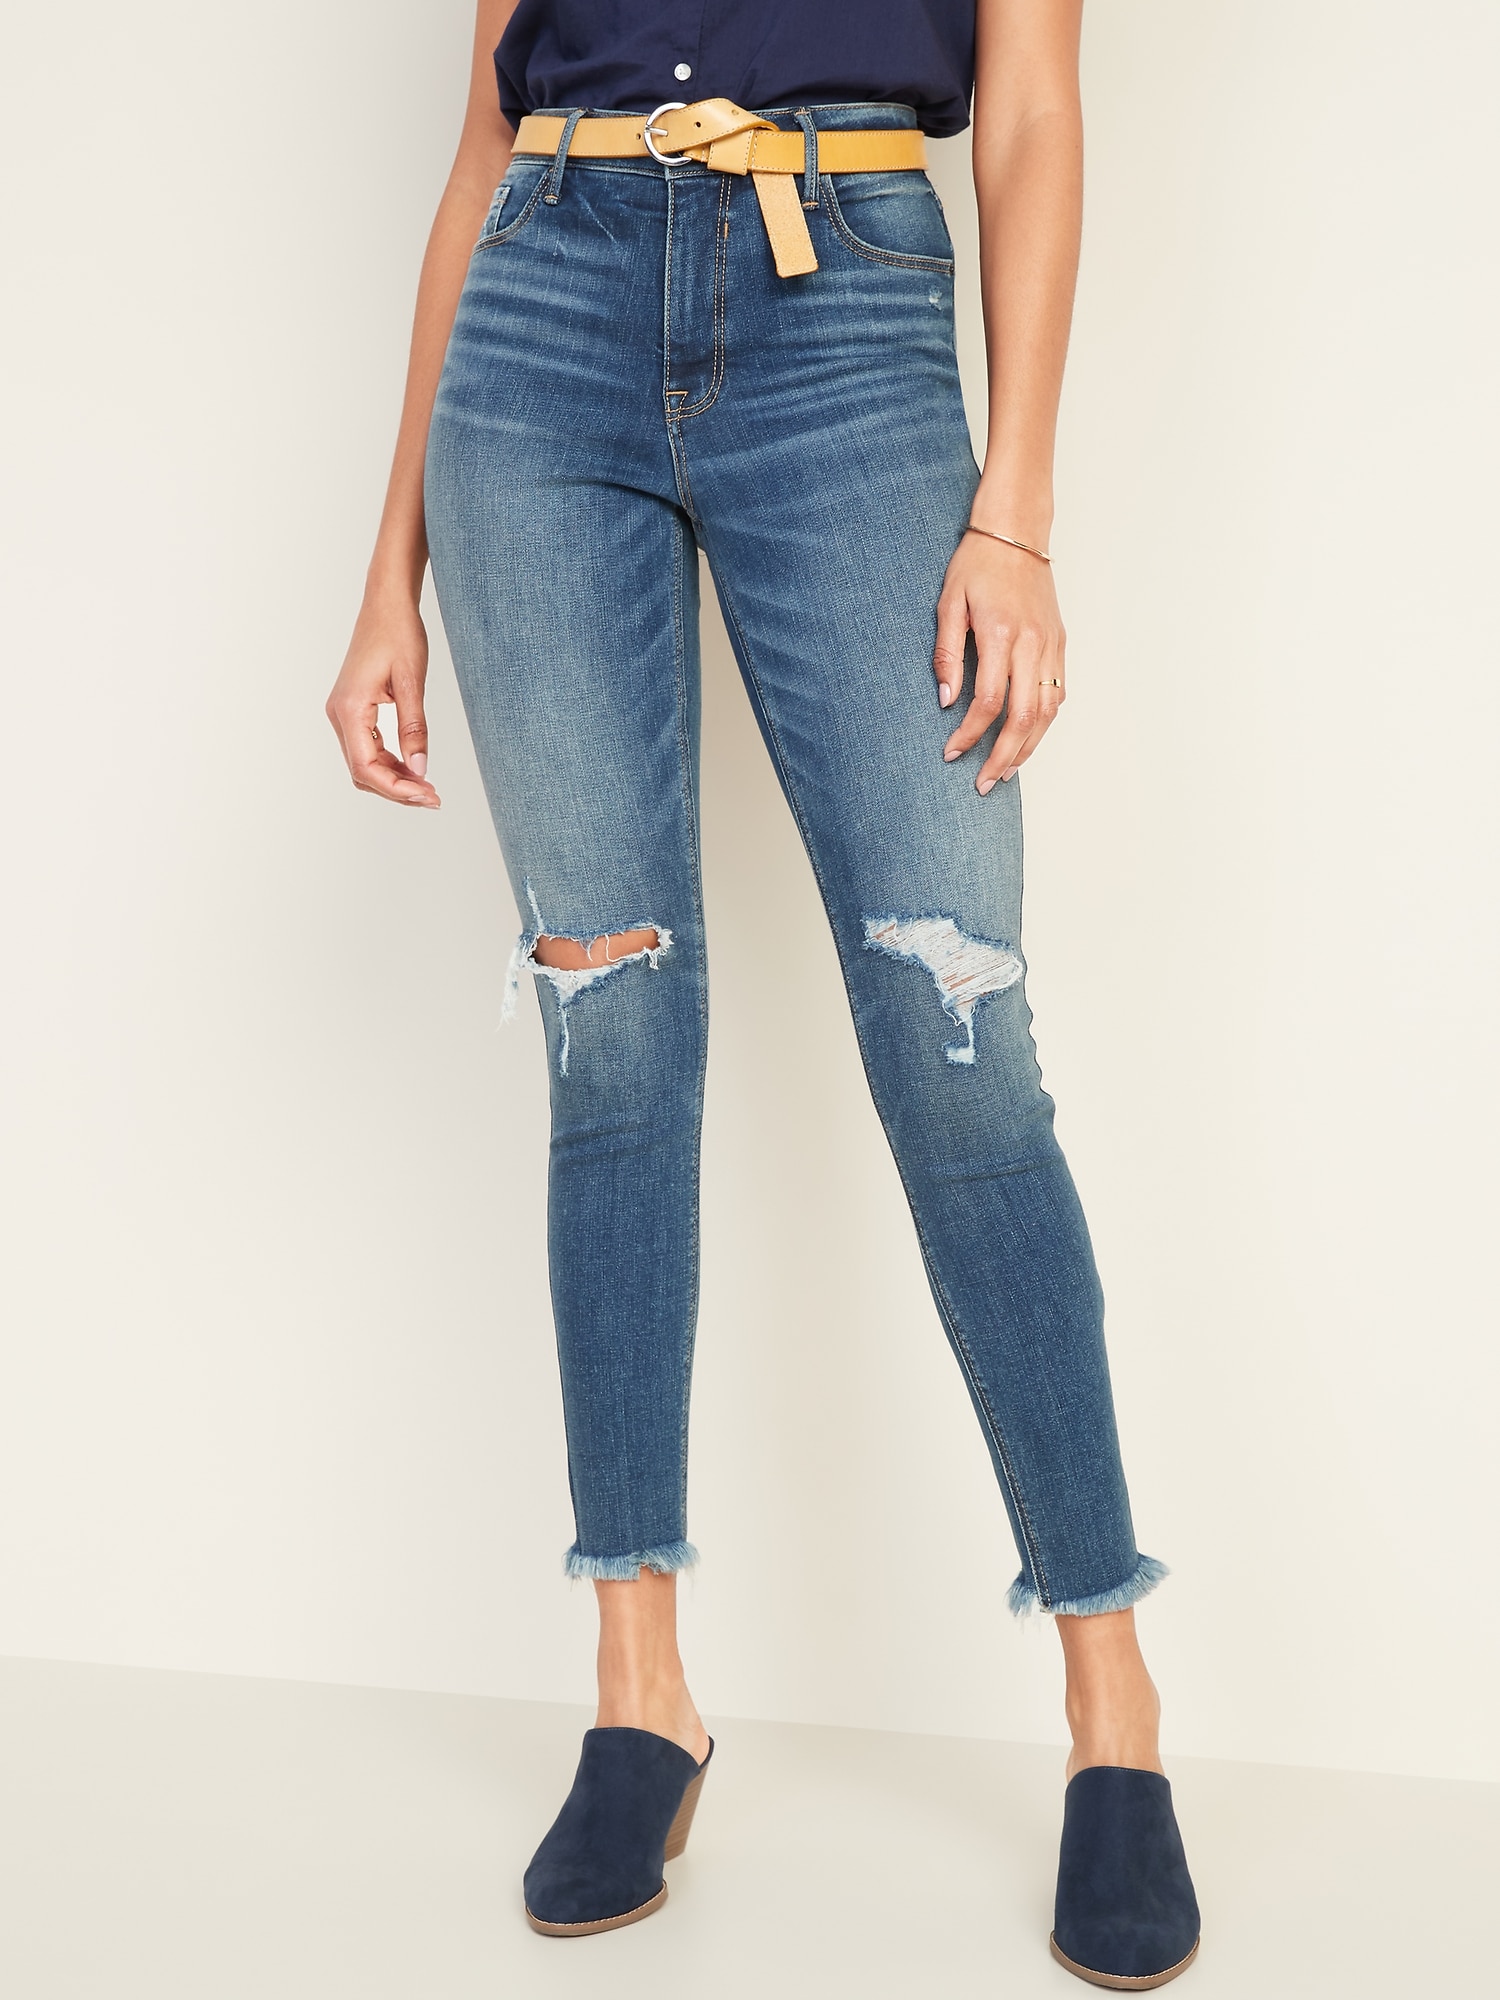 high ankle jeans womens